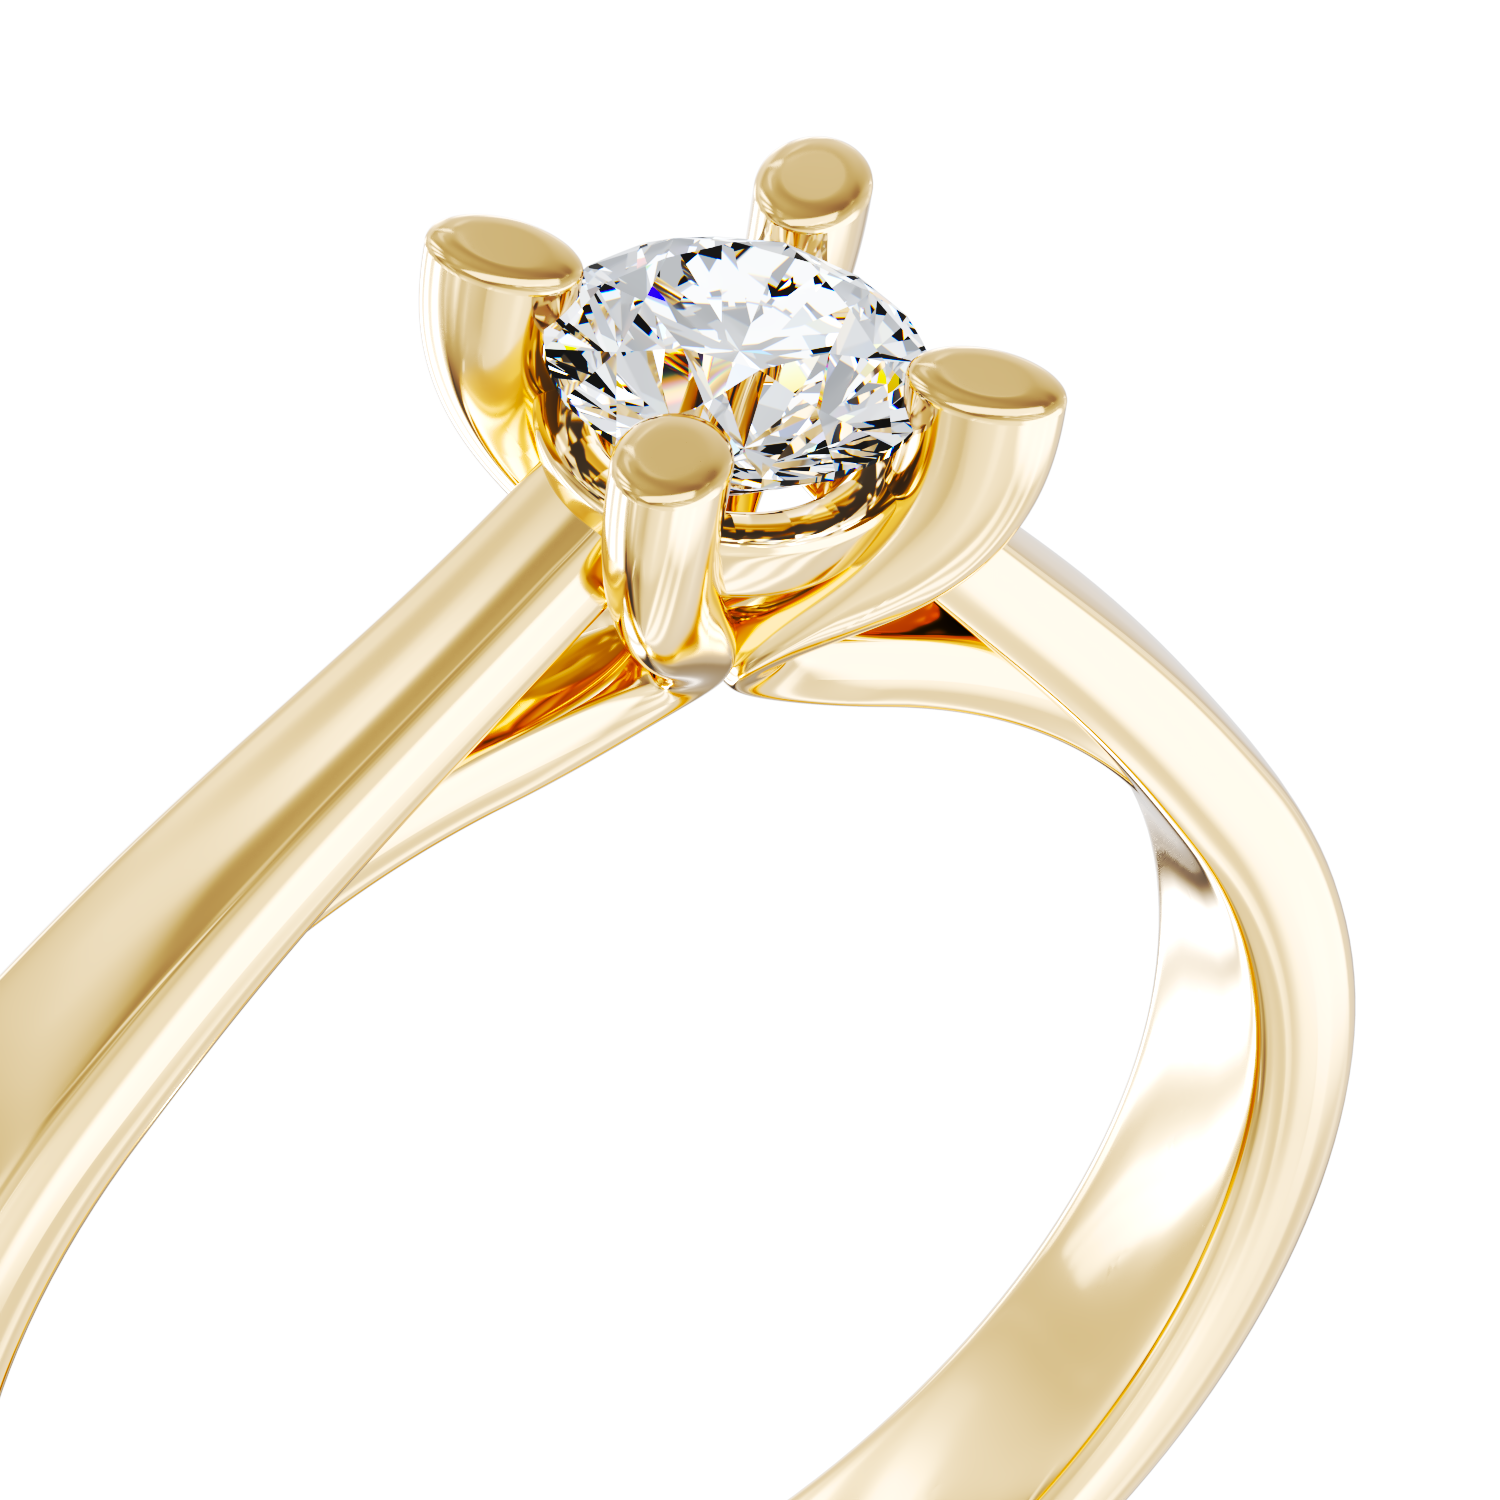 14K yellow gold engagement ring with a 0.15ct solitaire diamond